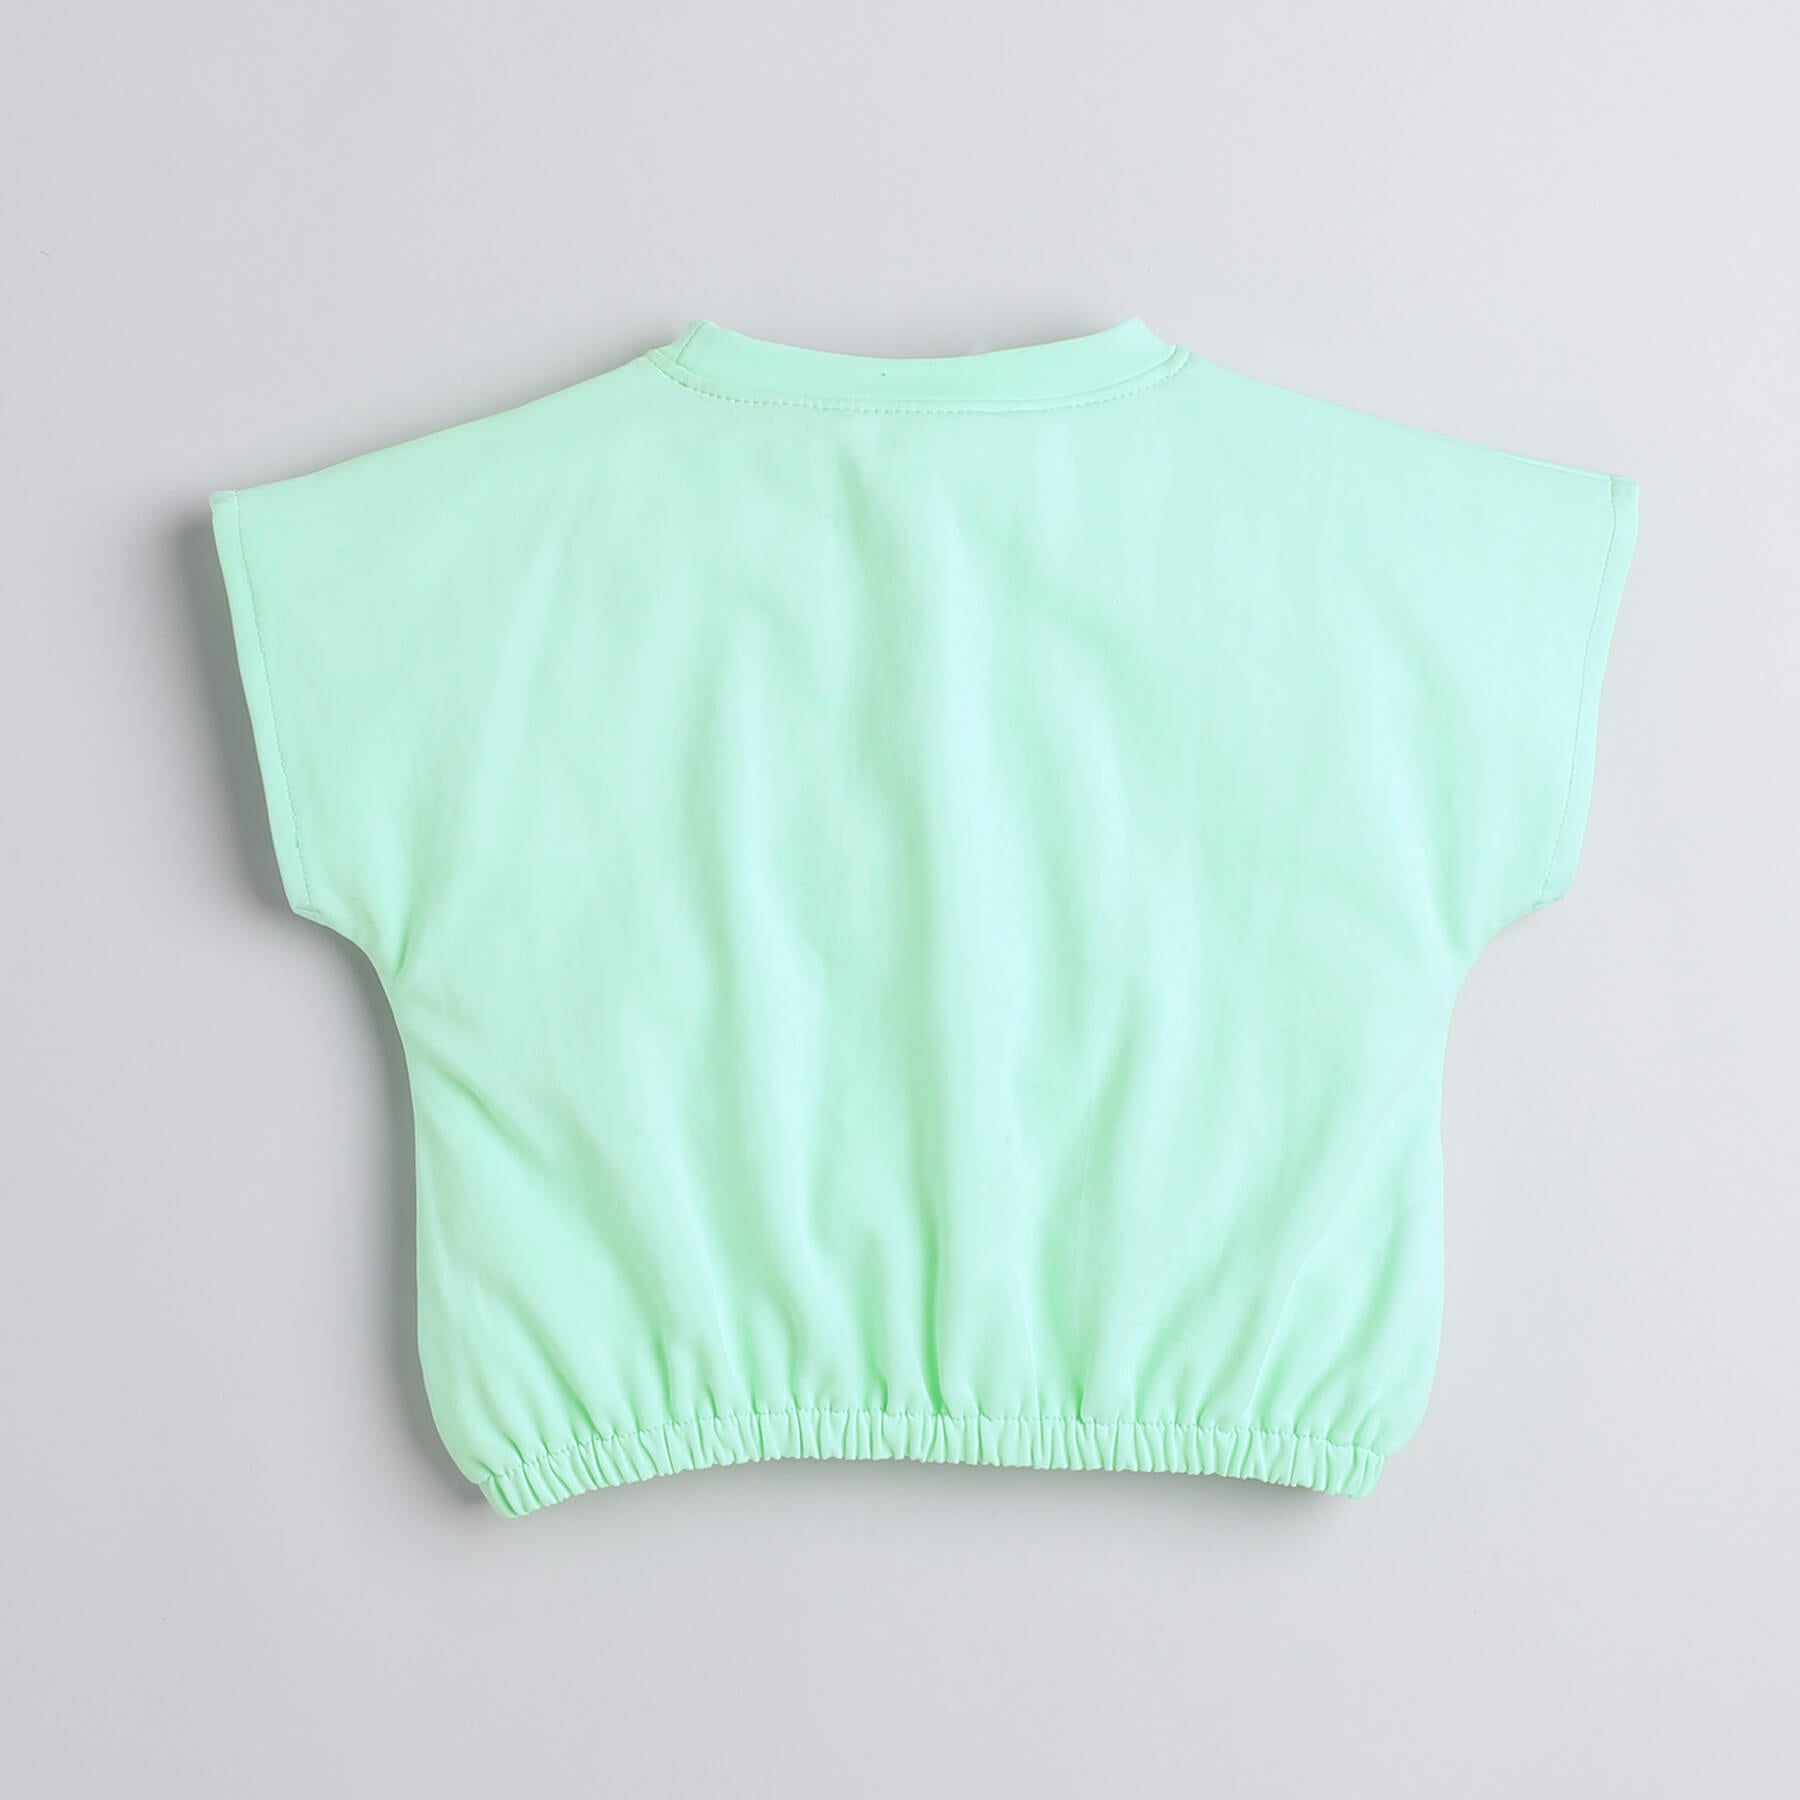 Taffykids waist elastic detail crop top and pipping detail pant set-Turquoise Green